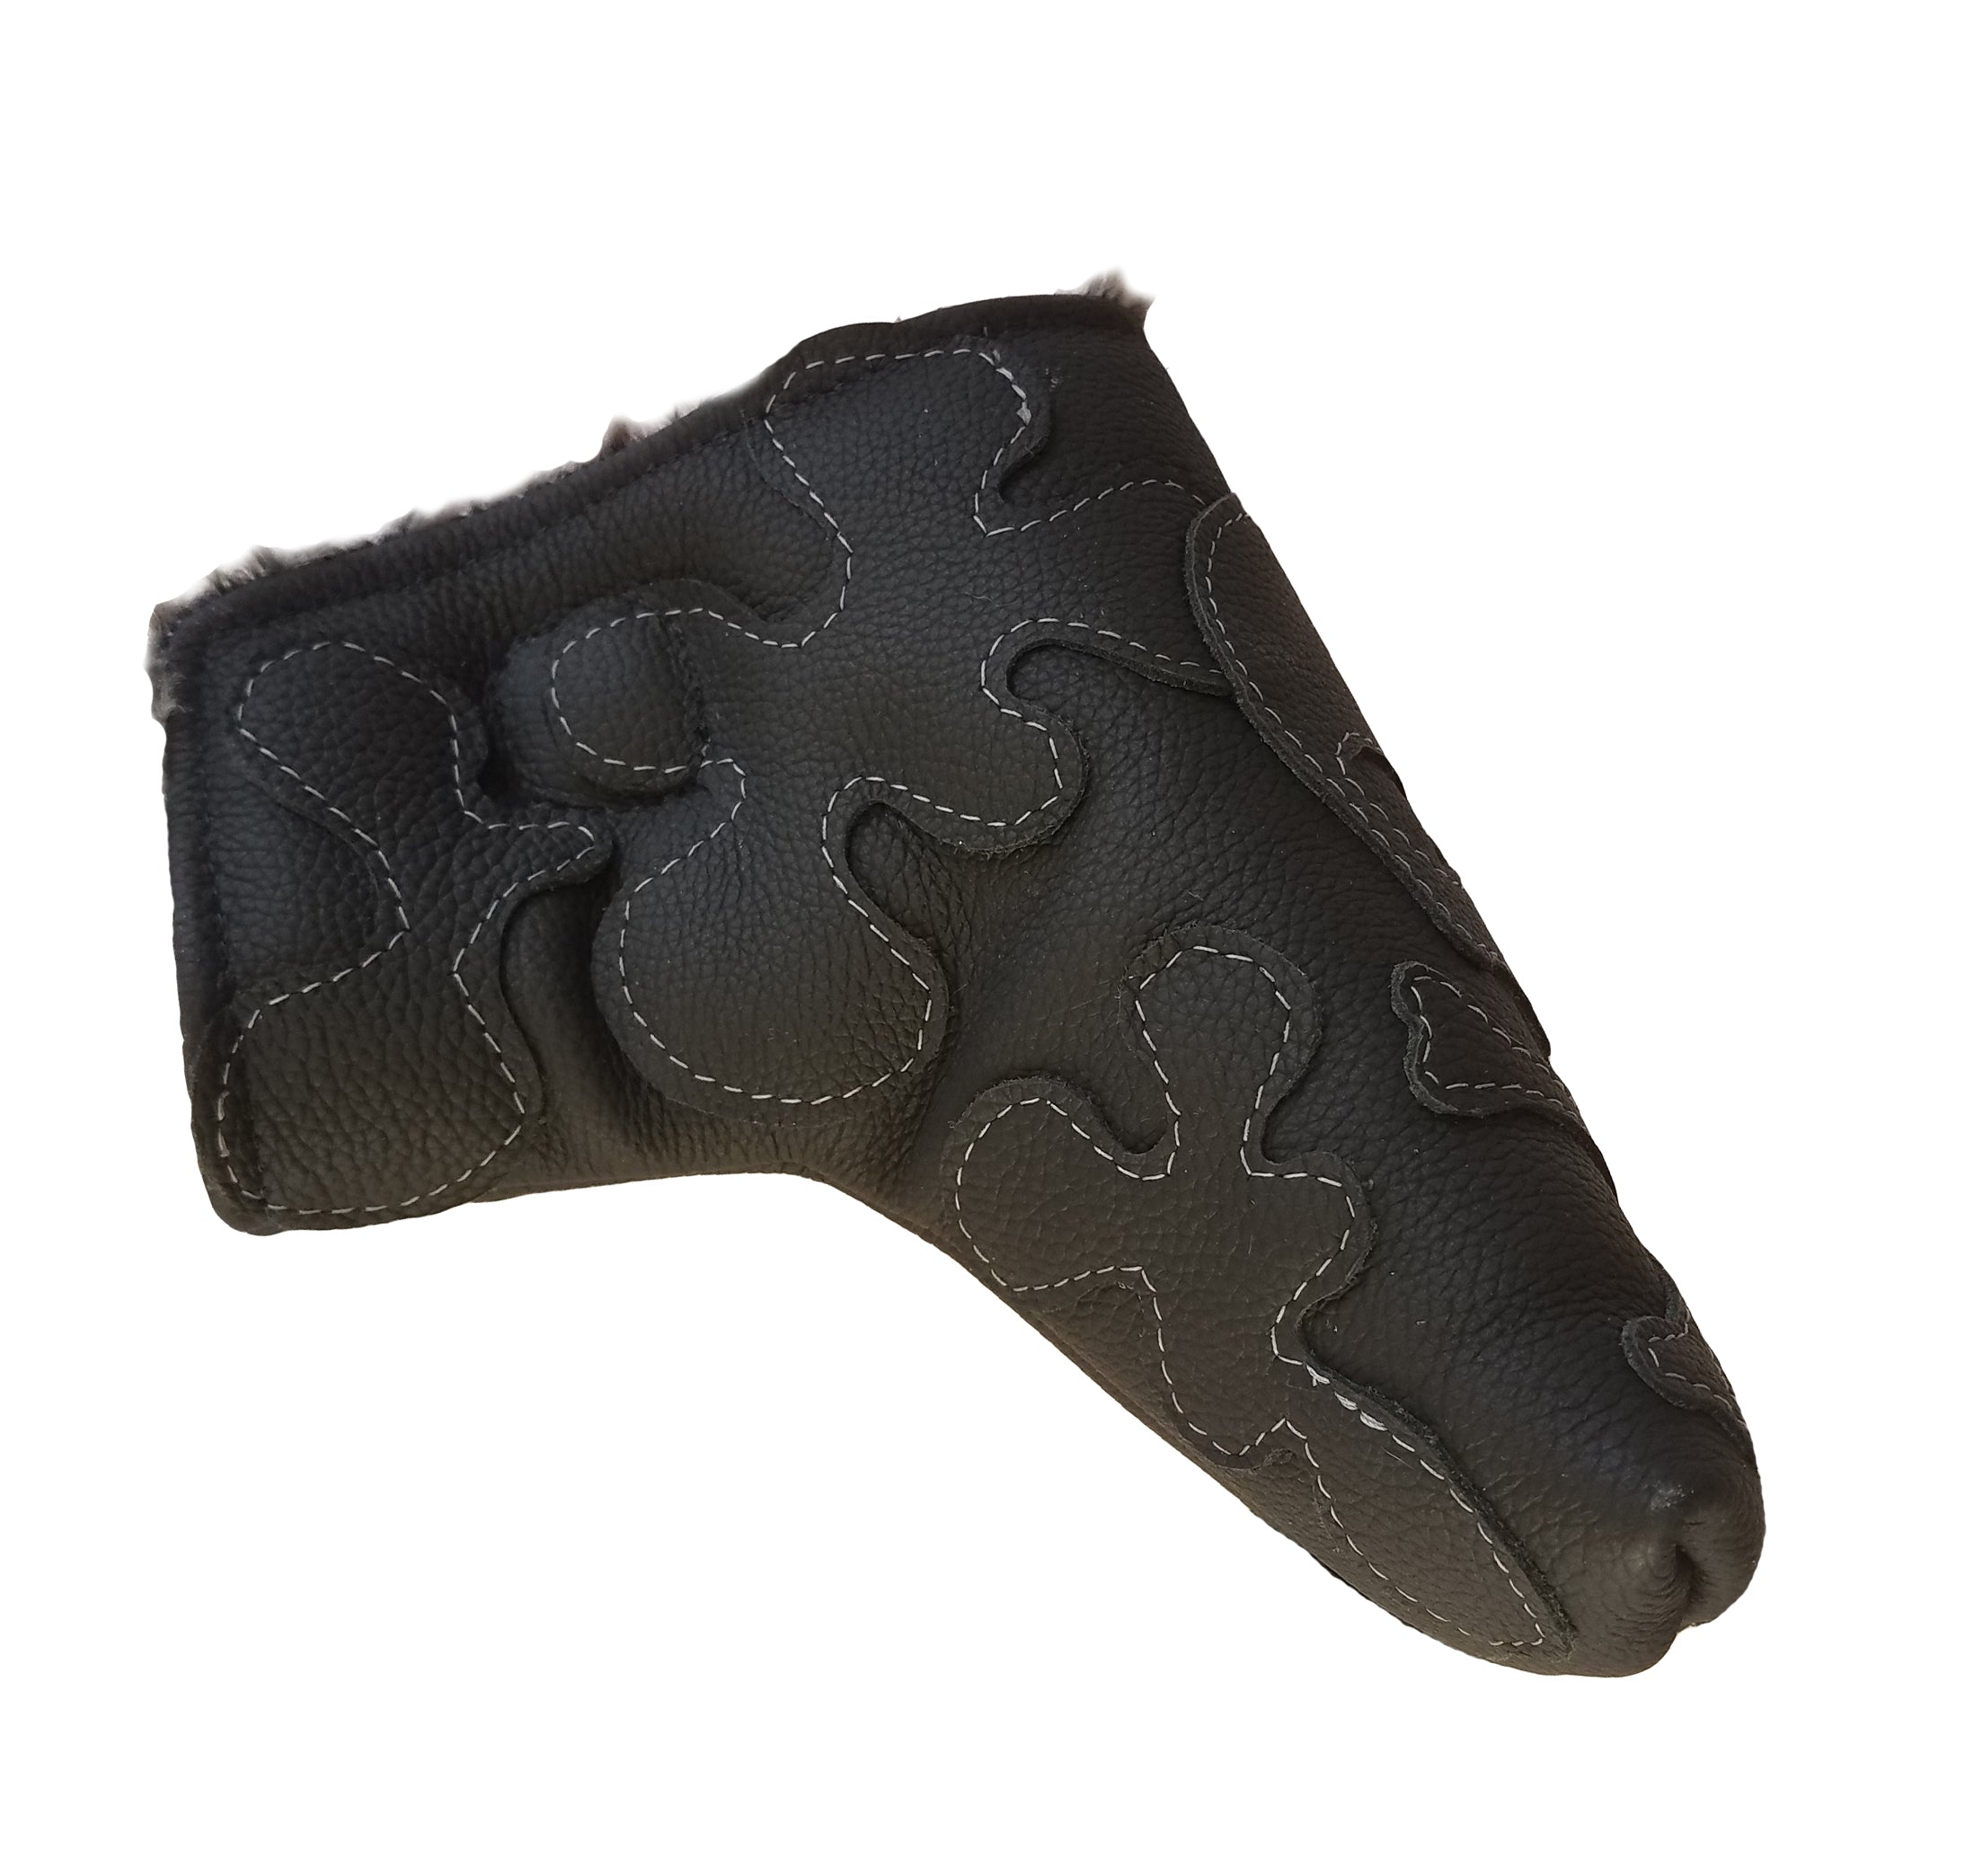 NEW! The "Murdered Out" White Stitched Putter Cover - Robert Mark Golf